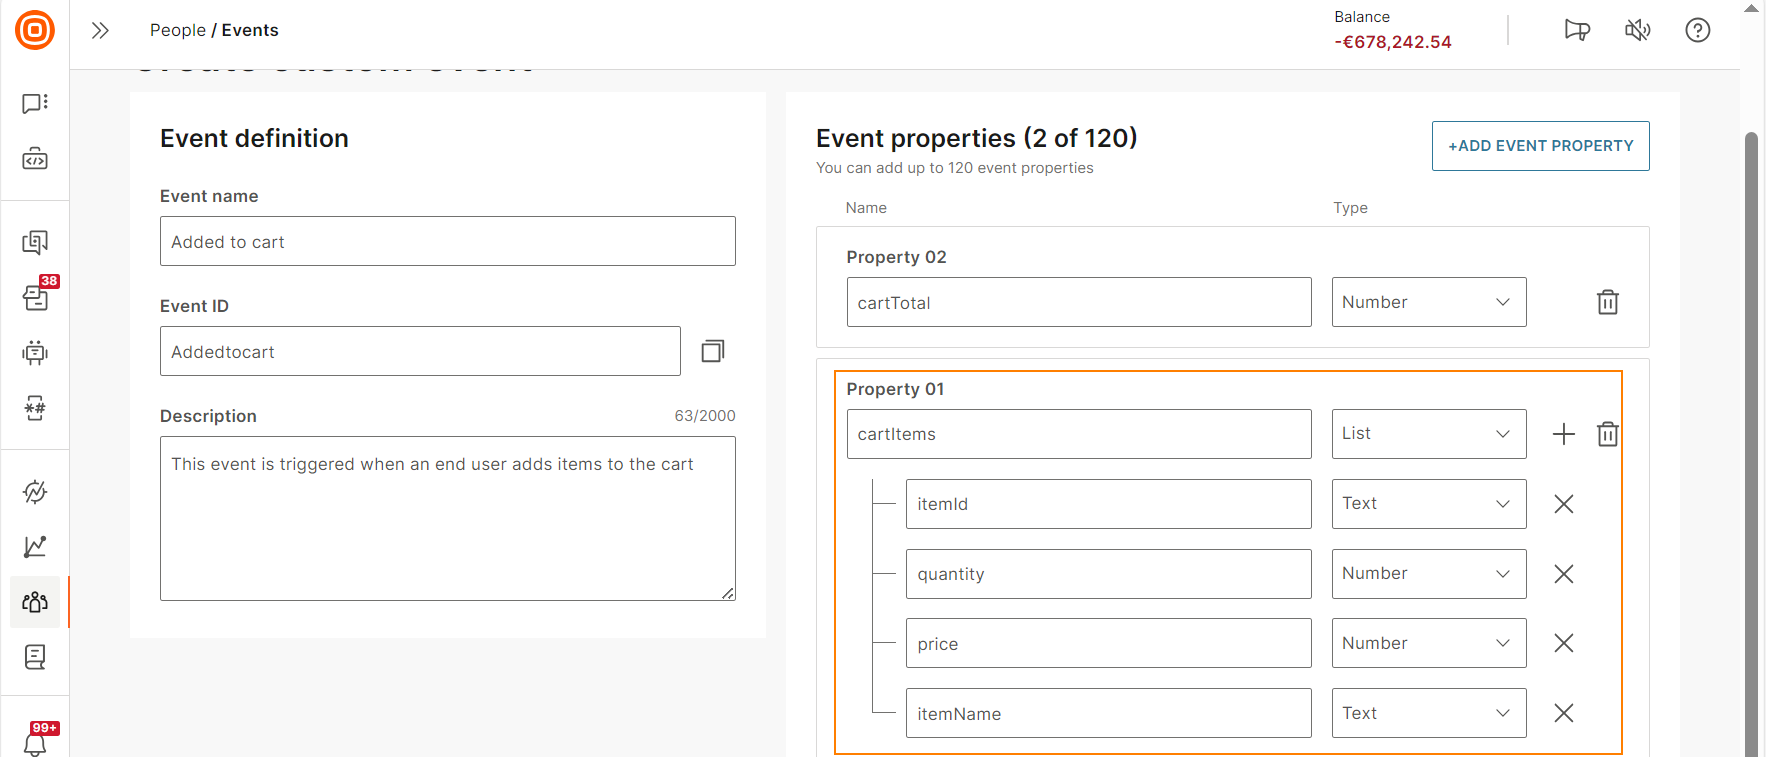 Property with list data type